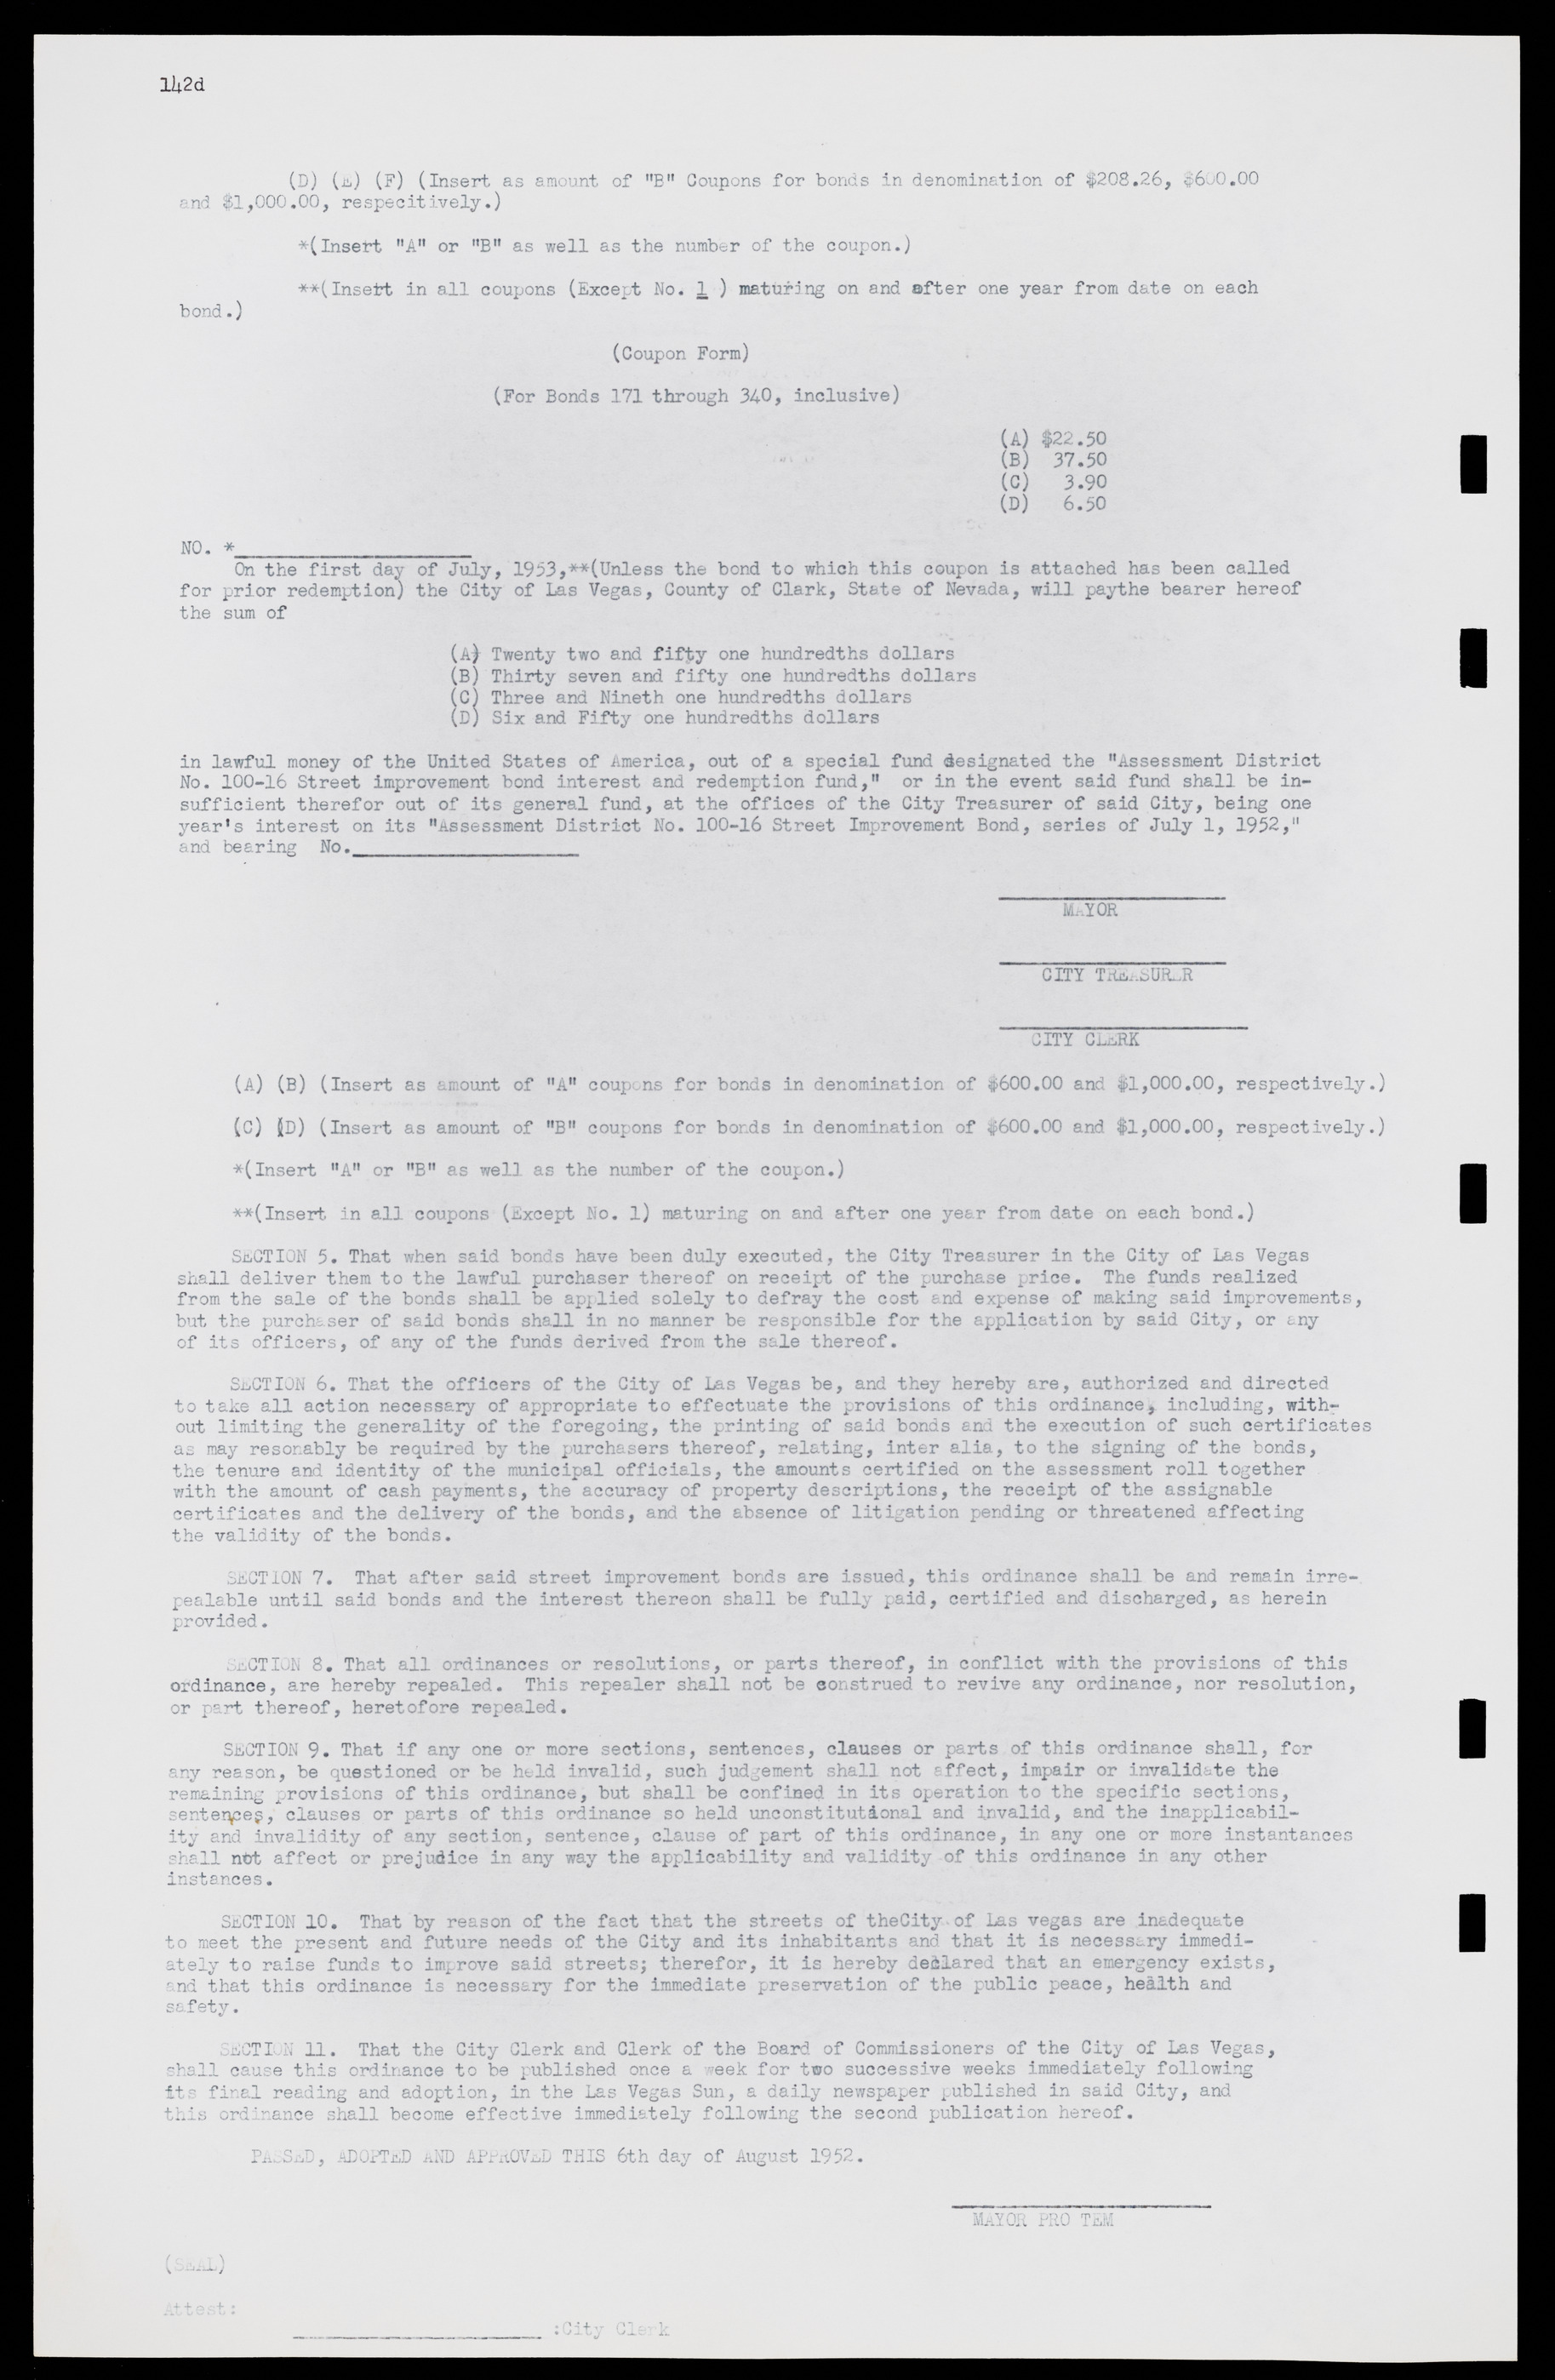 Las Vegas City Commission Minutes, May 26, 1952 to February 17, 1954, lvc000008-152